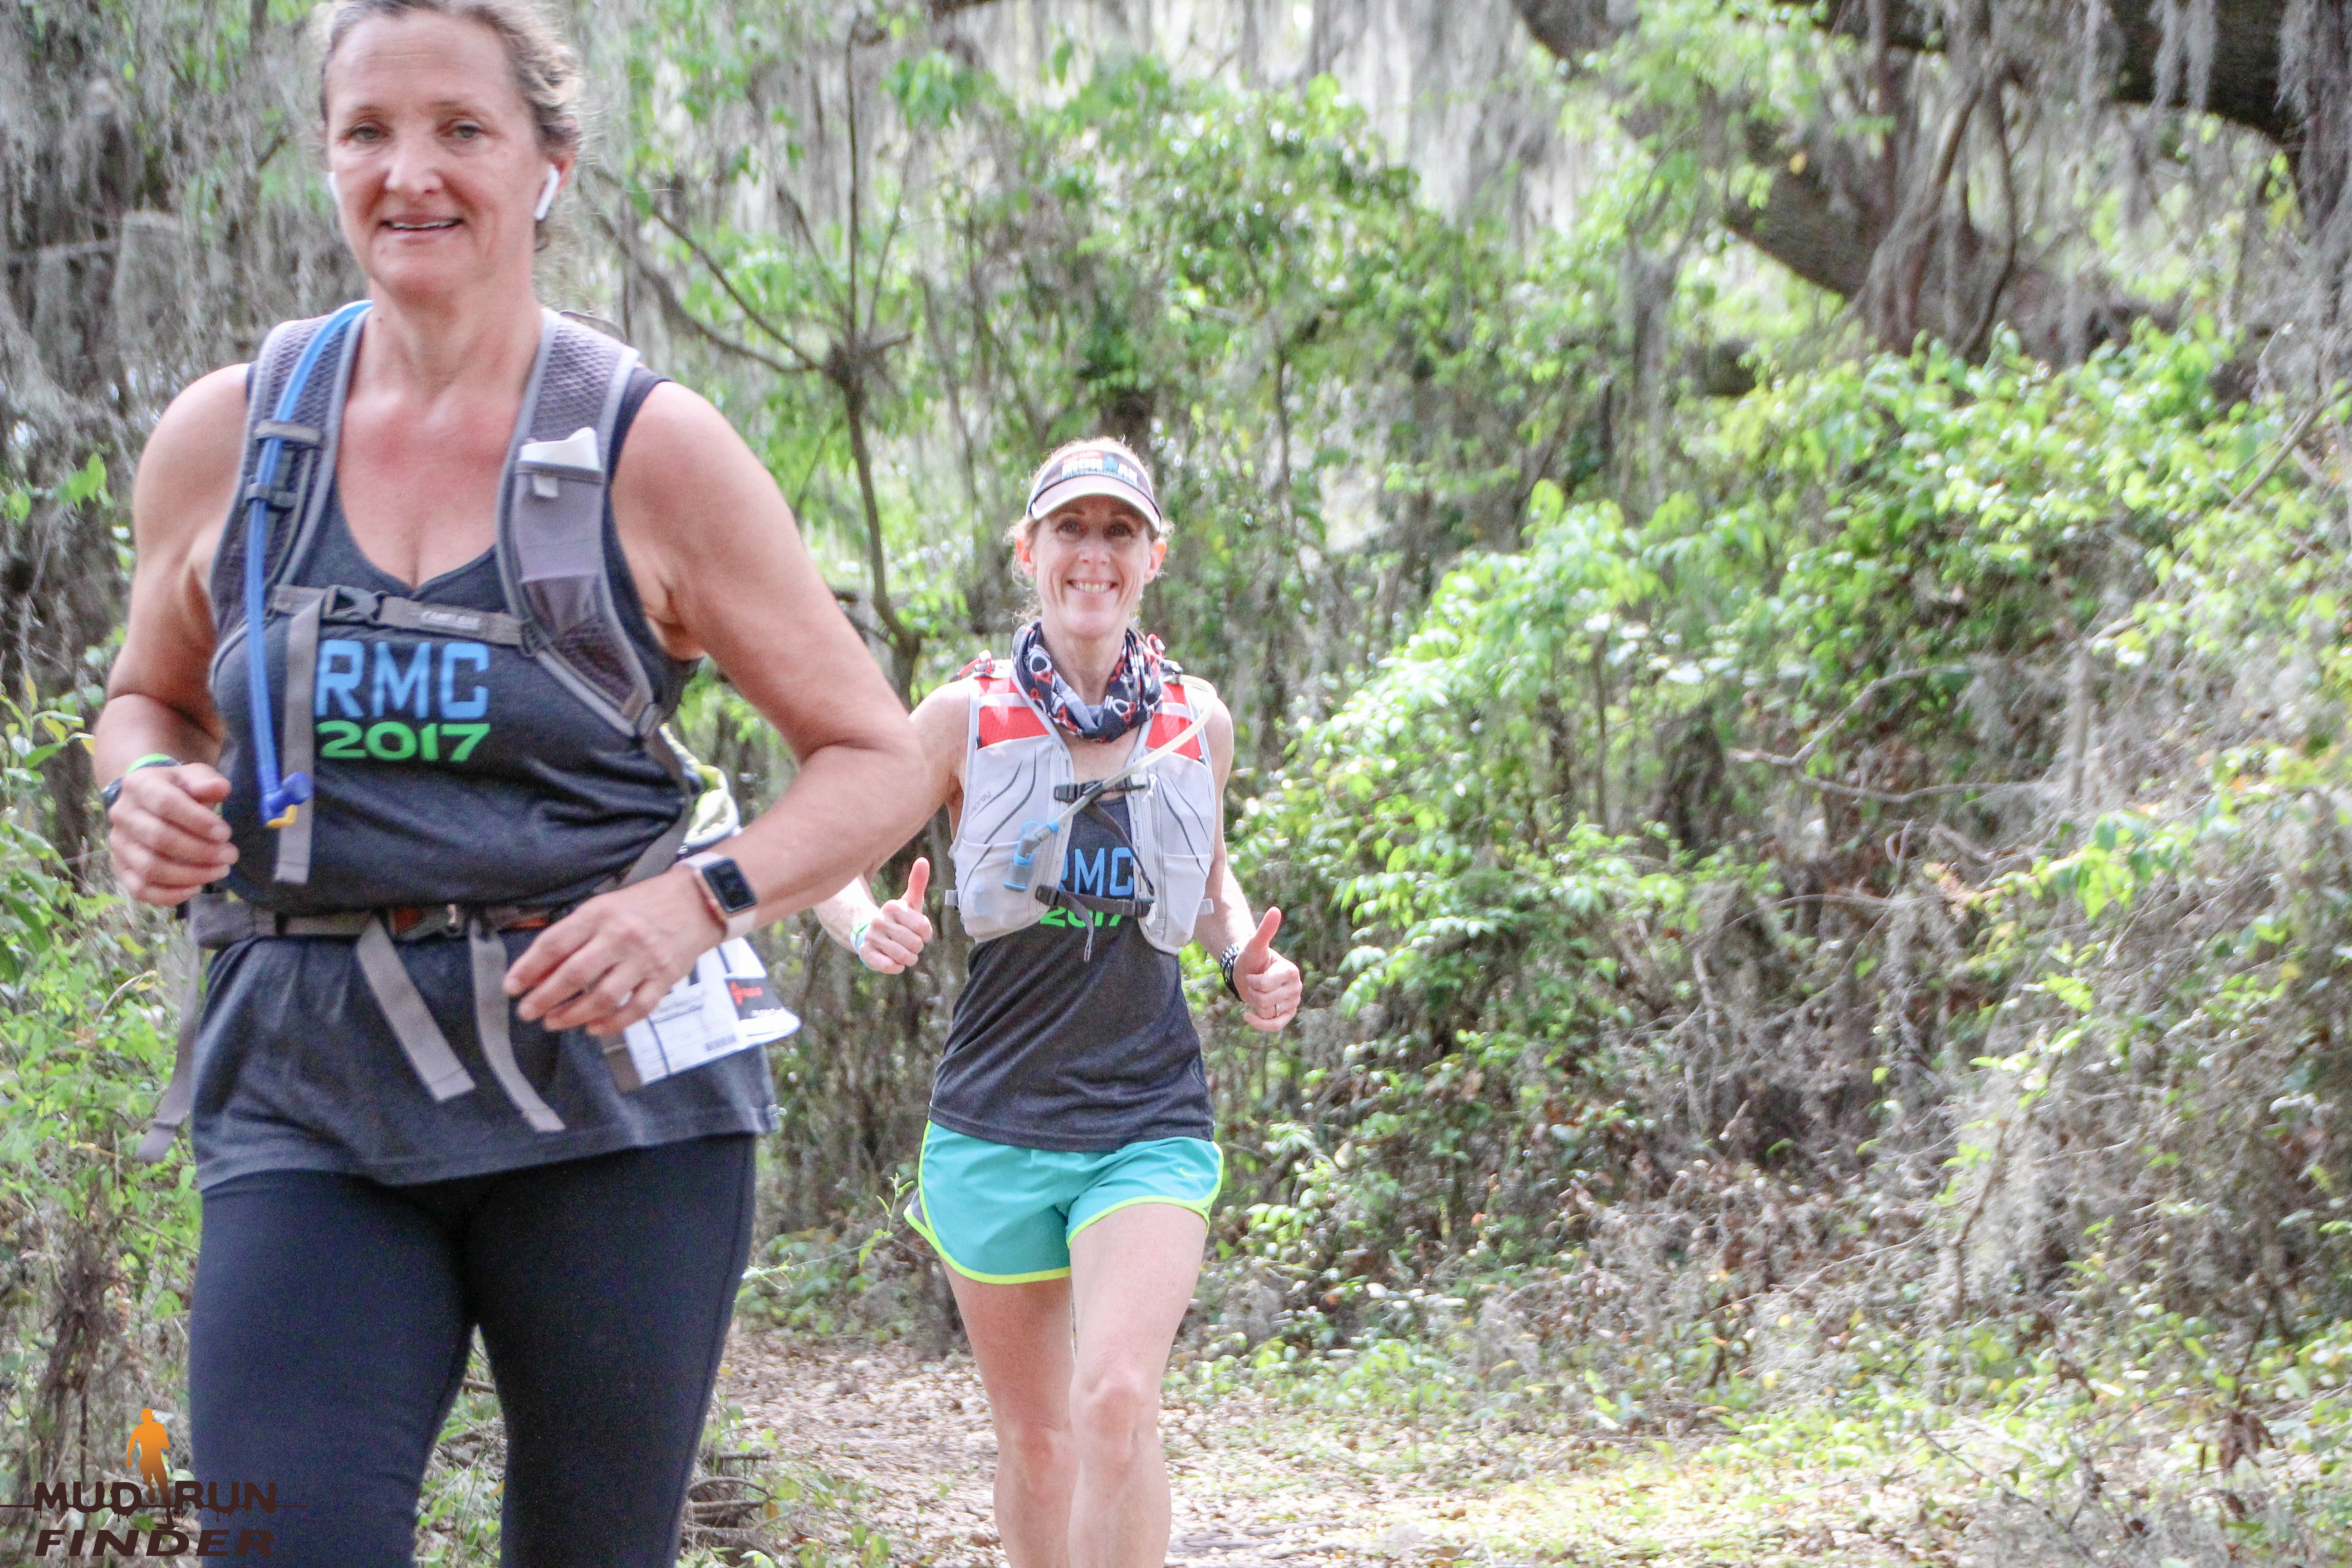 GroundHog Events presents Ares’ Vengeance Trail Race - March 10th, 2018 in Alachua, FL | Photo Credit: Mud Run Finder